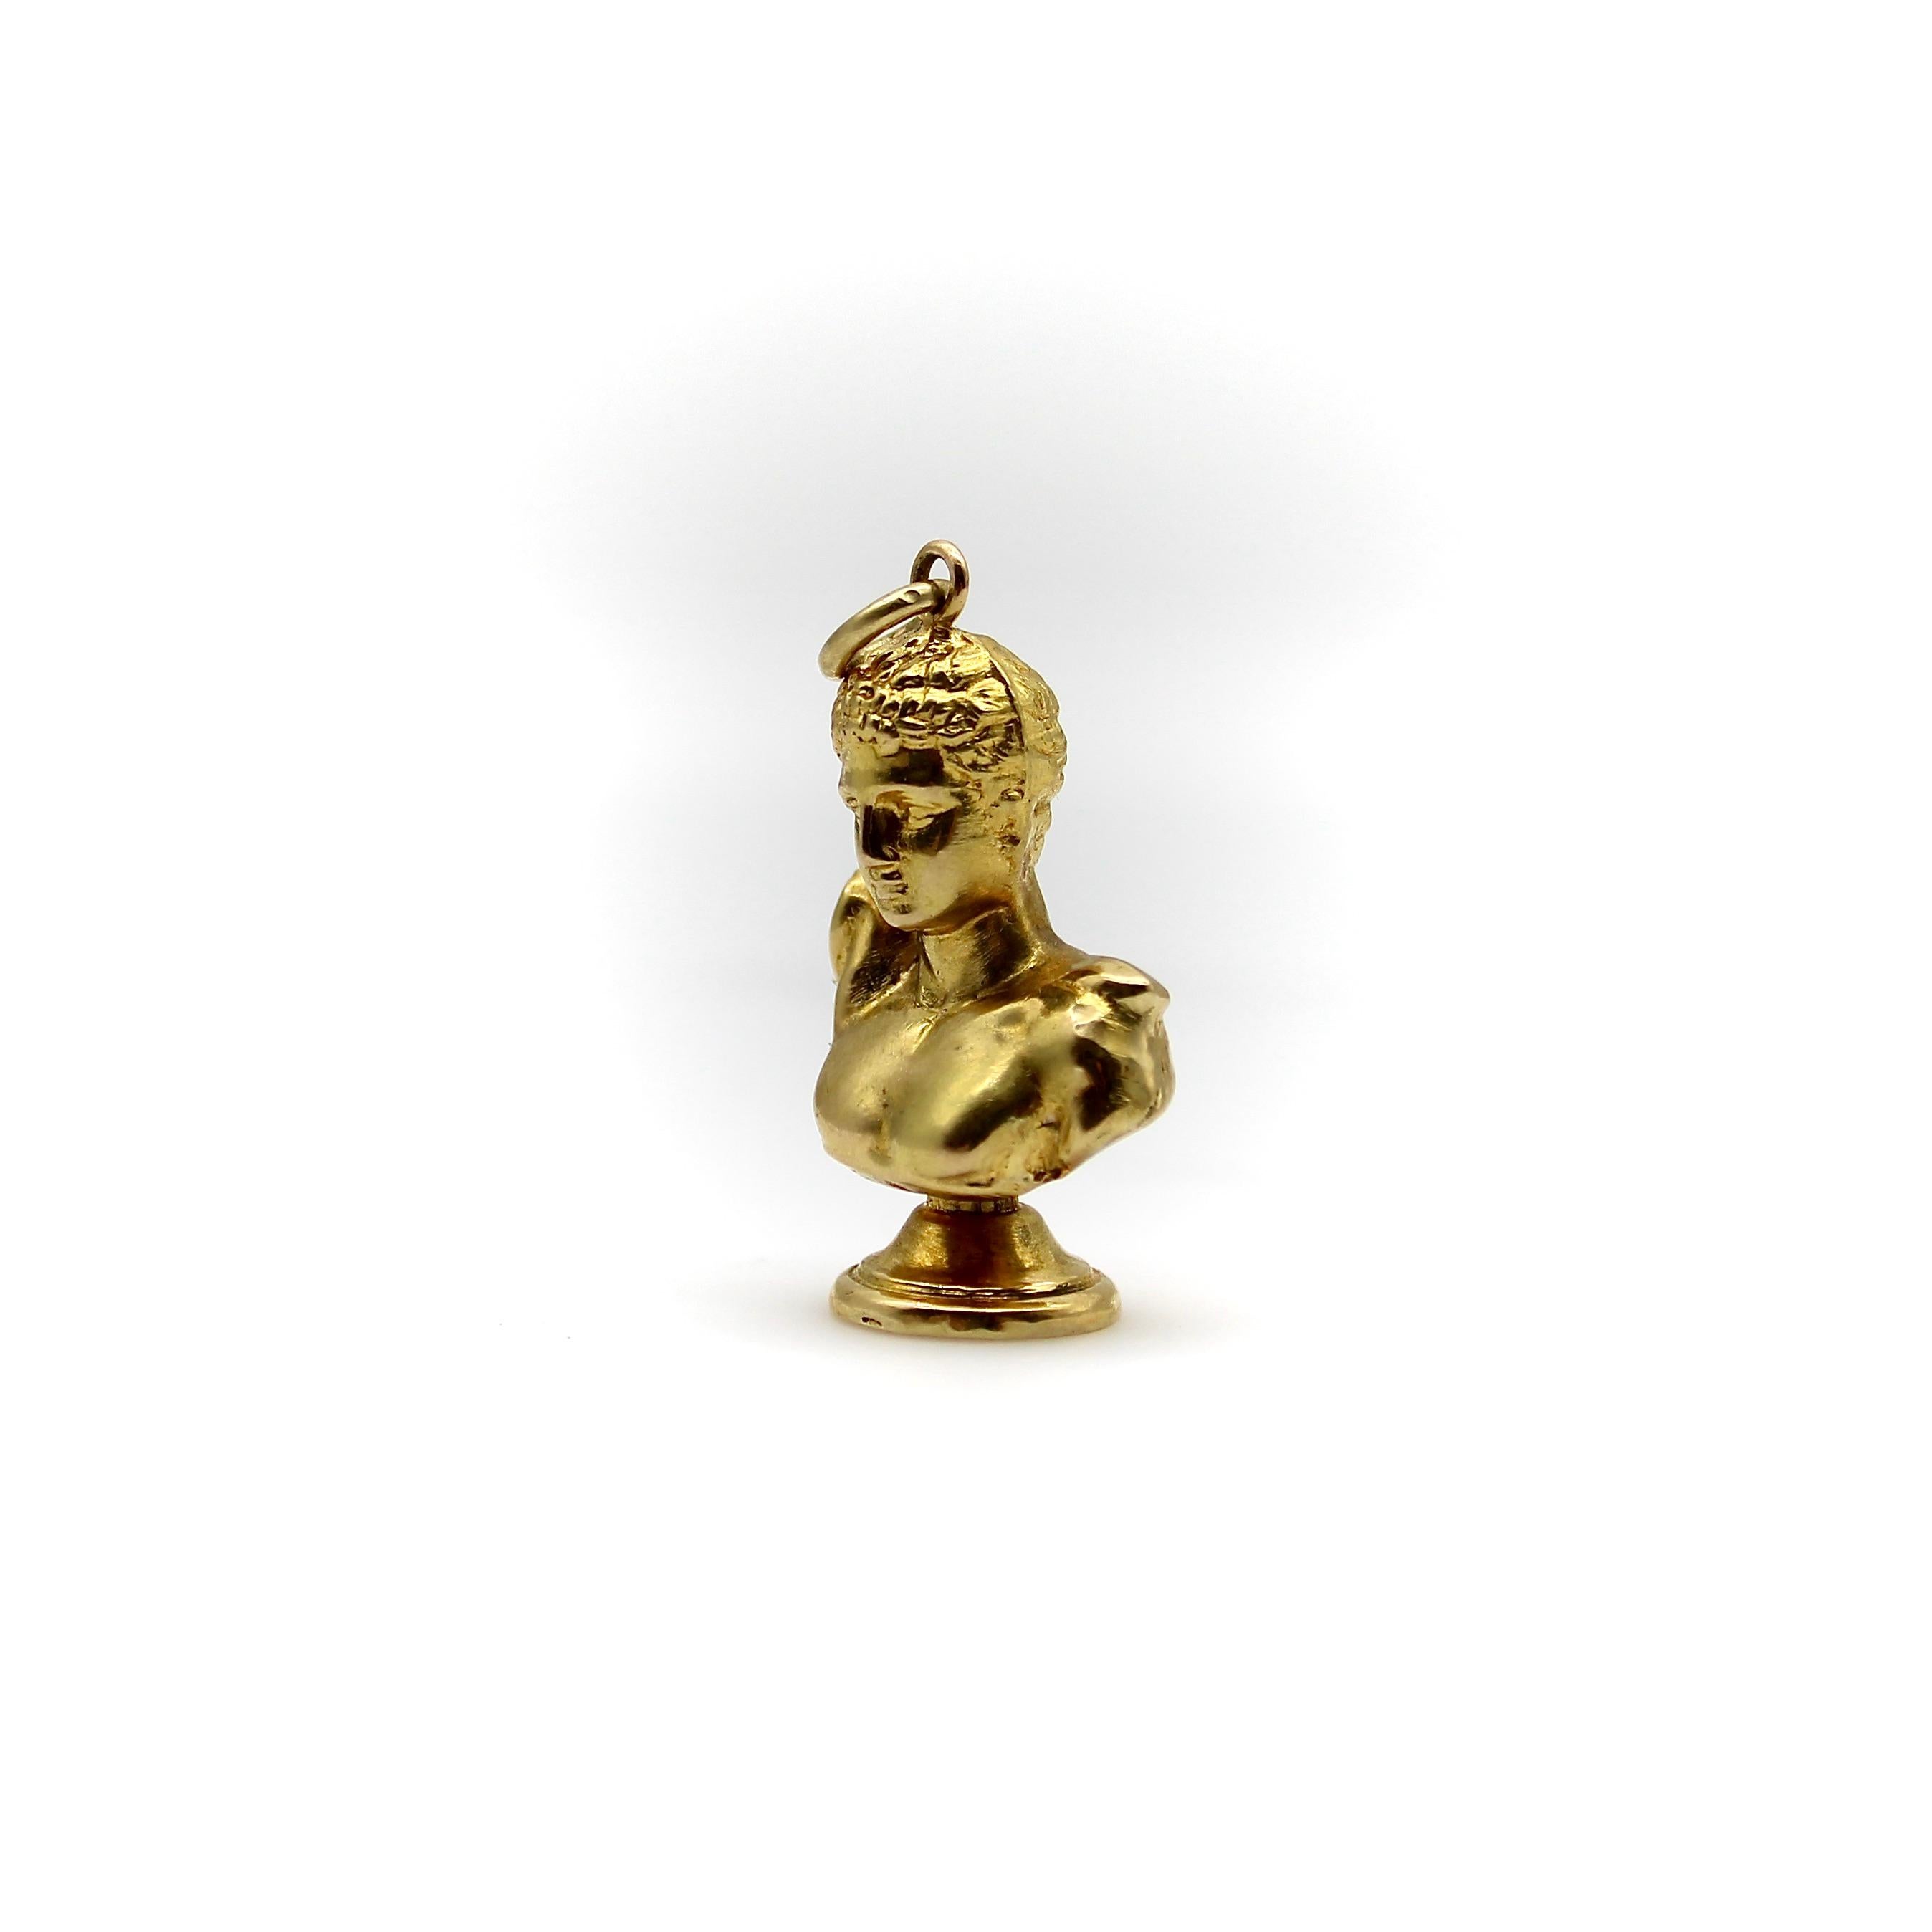 Kirsten’s Corner has a soft spot for the classics in our inventory and we are often drawn towards classical renditions of ancient sights. This piece is a very handsome 18k gold bust modeled after Hermes of Olympia, a sculpture found in the